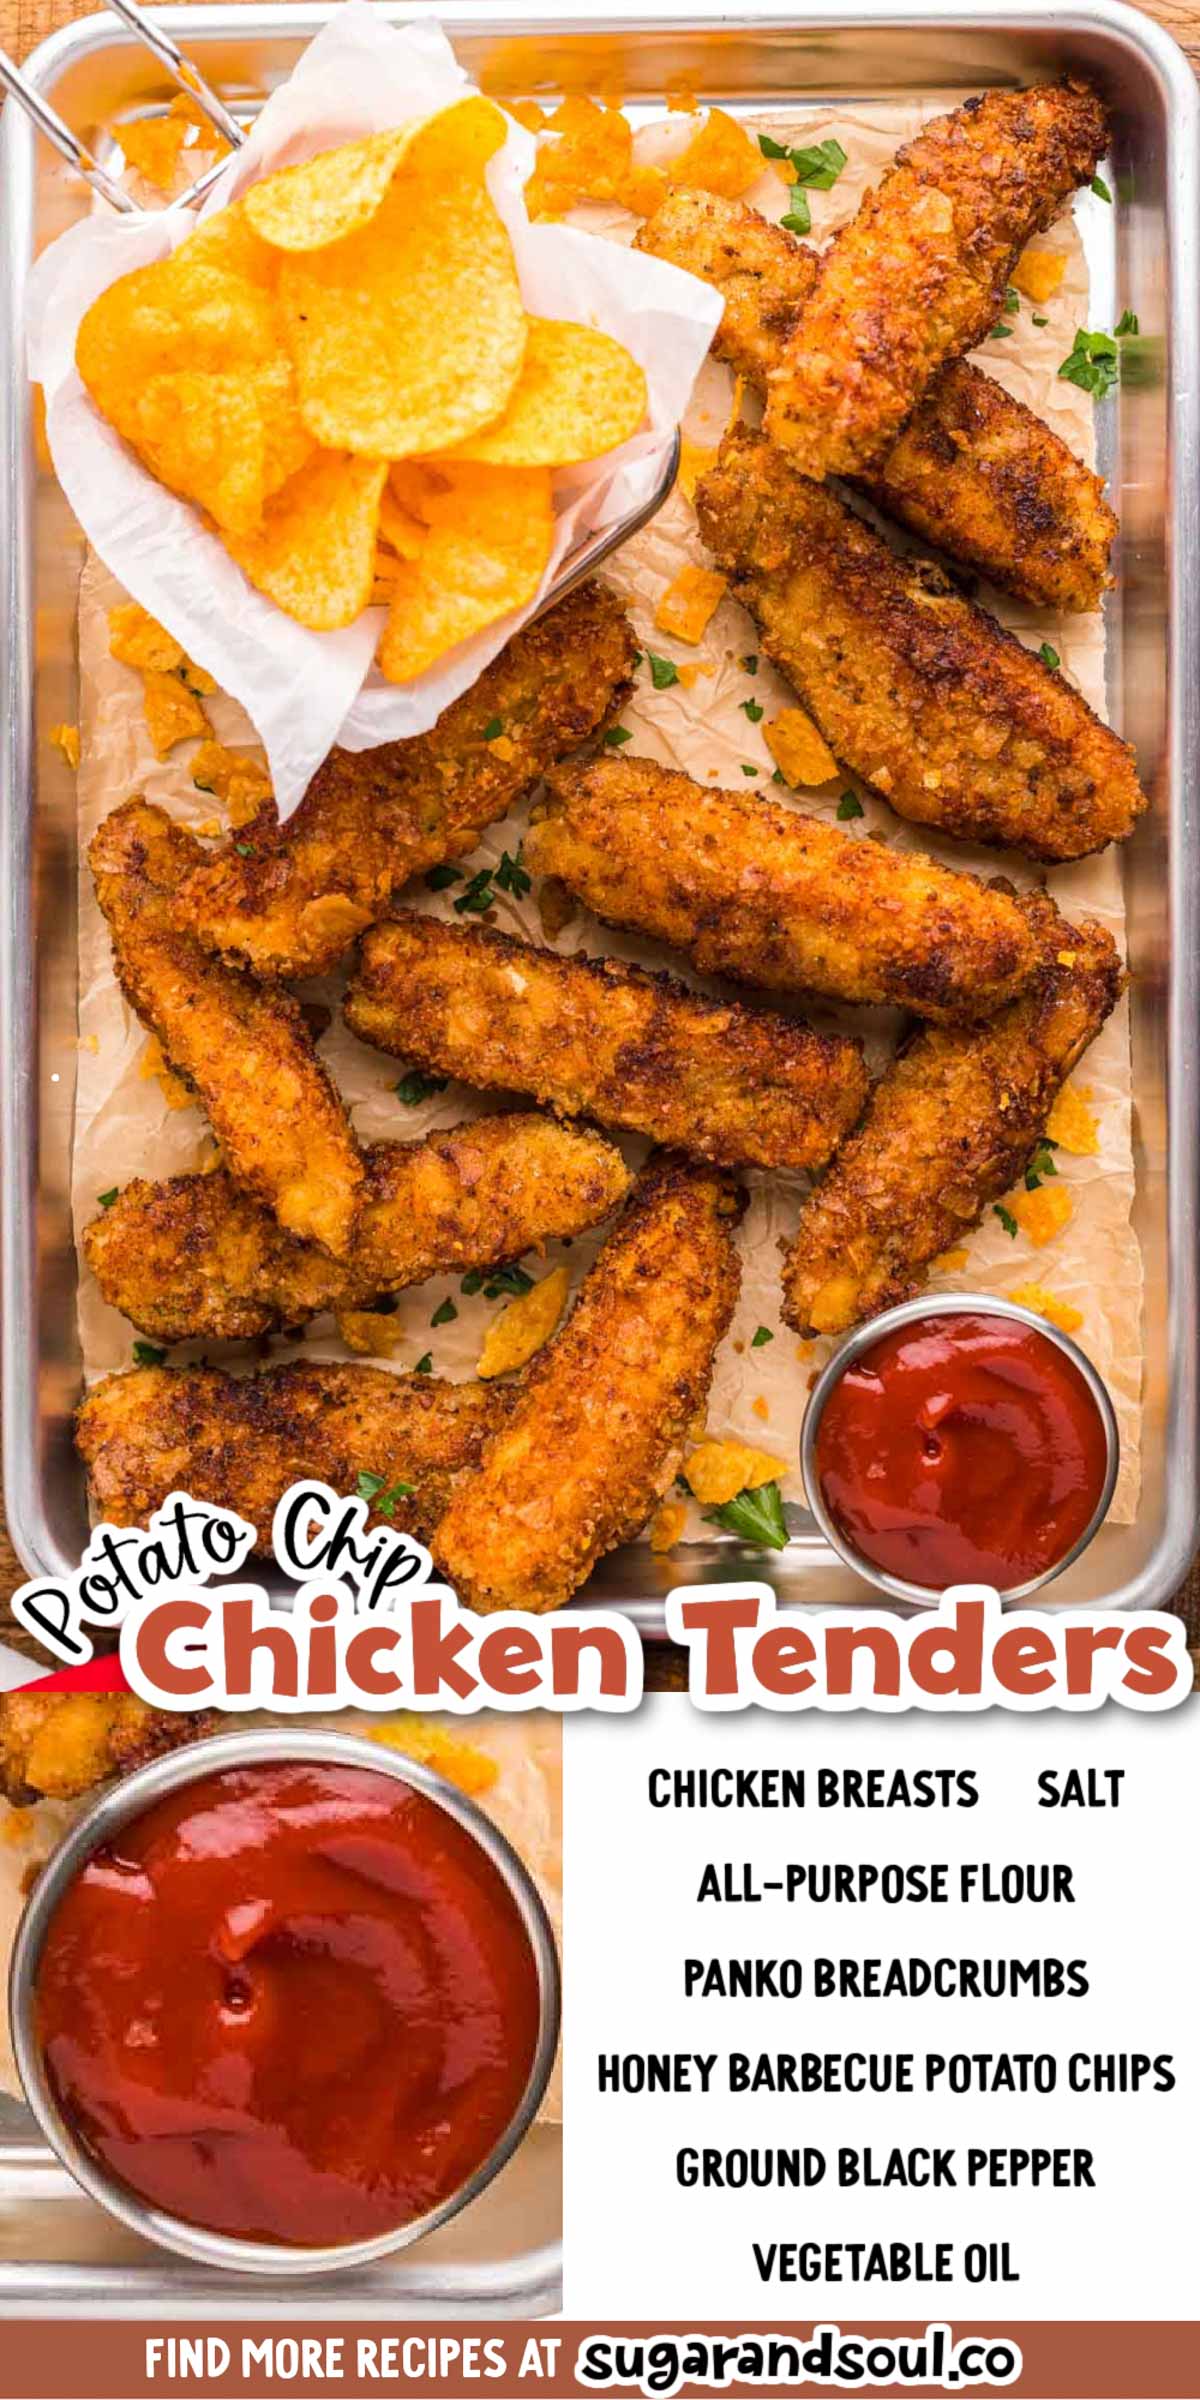 Potato Chip Chicken Tenders are coated in a honey barbecue potato chip bread crumb mixture and fried to golden brown perfection! You can have these hitting the dinner table in just 20 minutes! via @sugarandsoulco